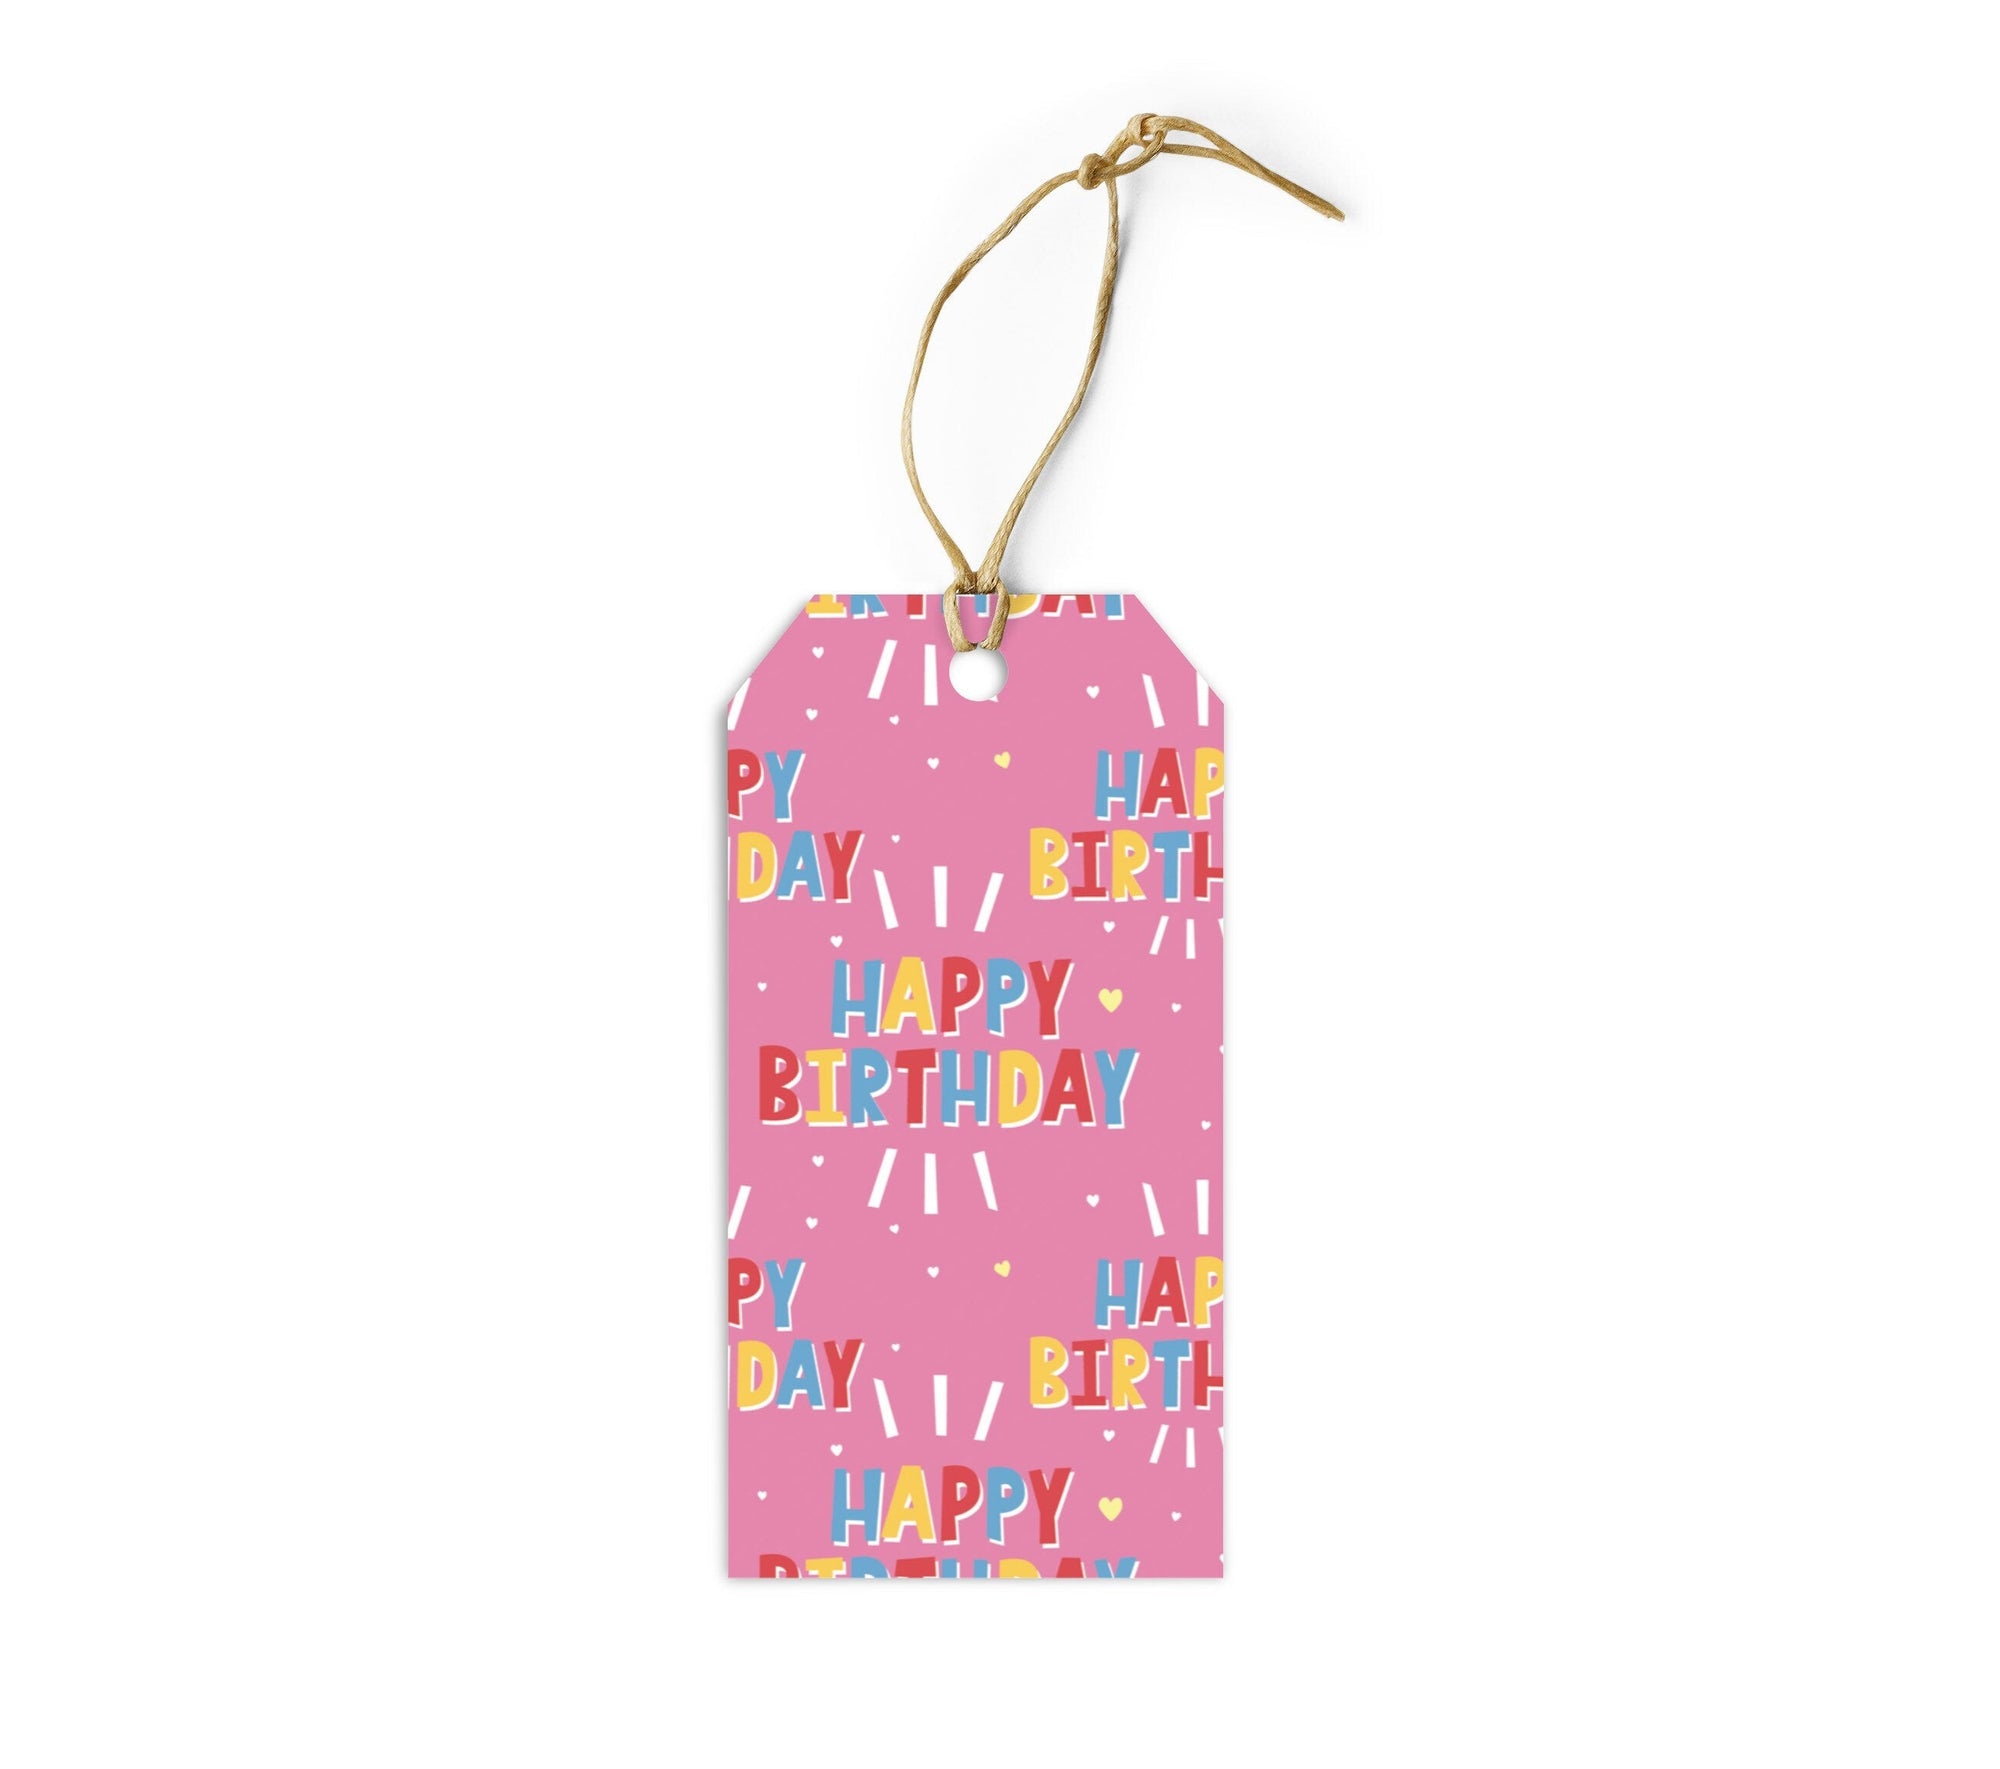 Happy Birthday On Pink Gift Tags - Set of 10 Gift Tags &amp; Labels Violagrace-174 